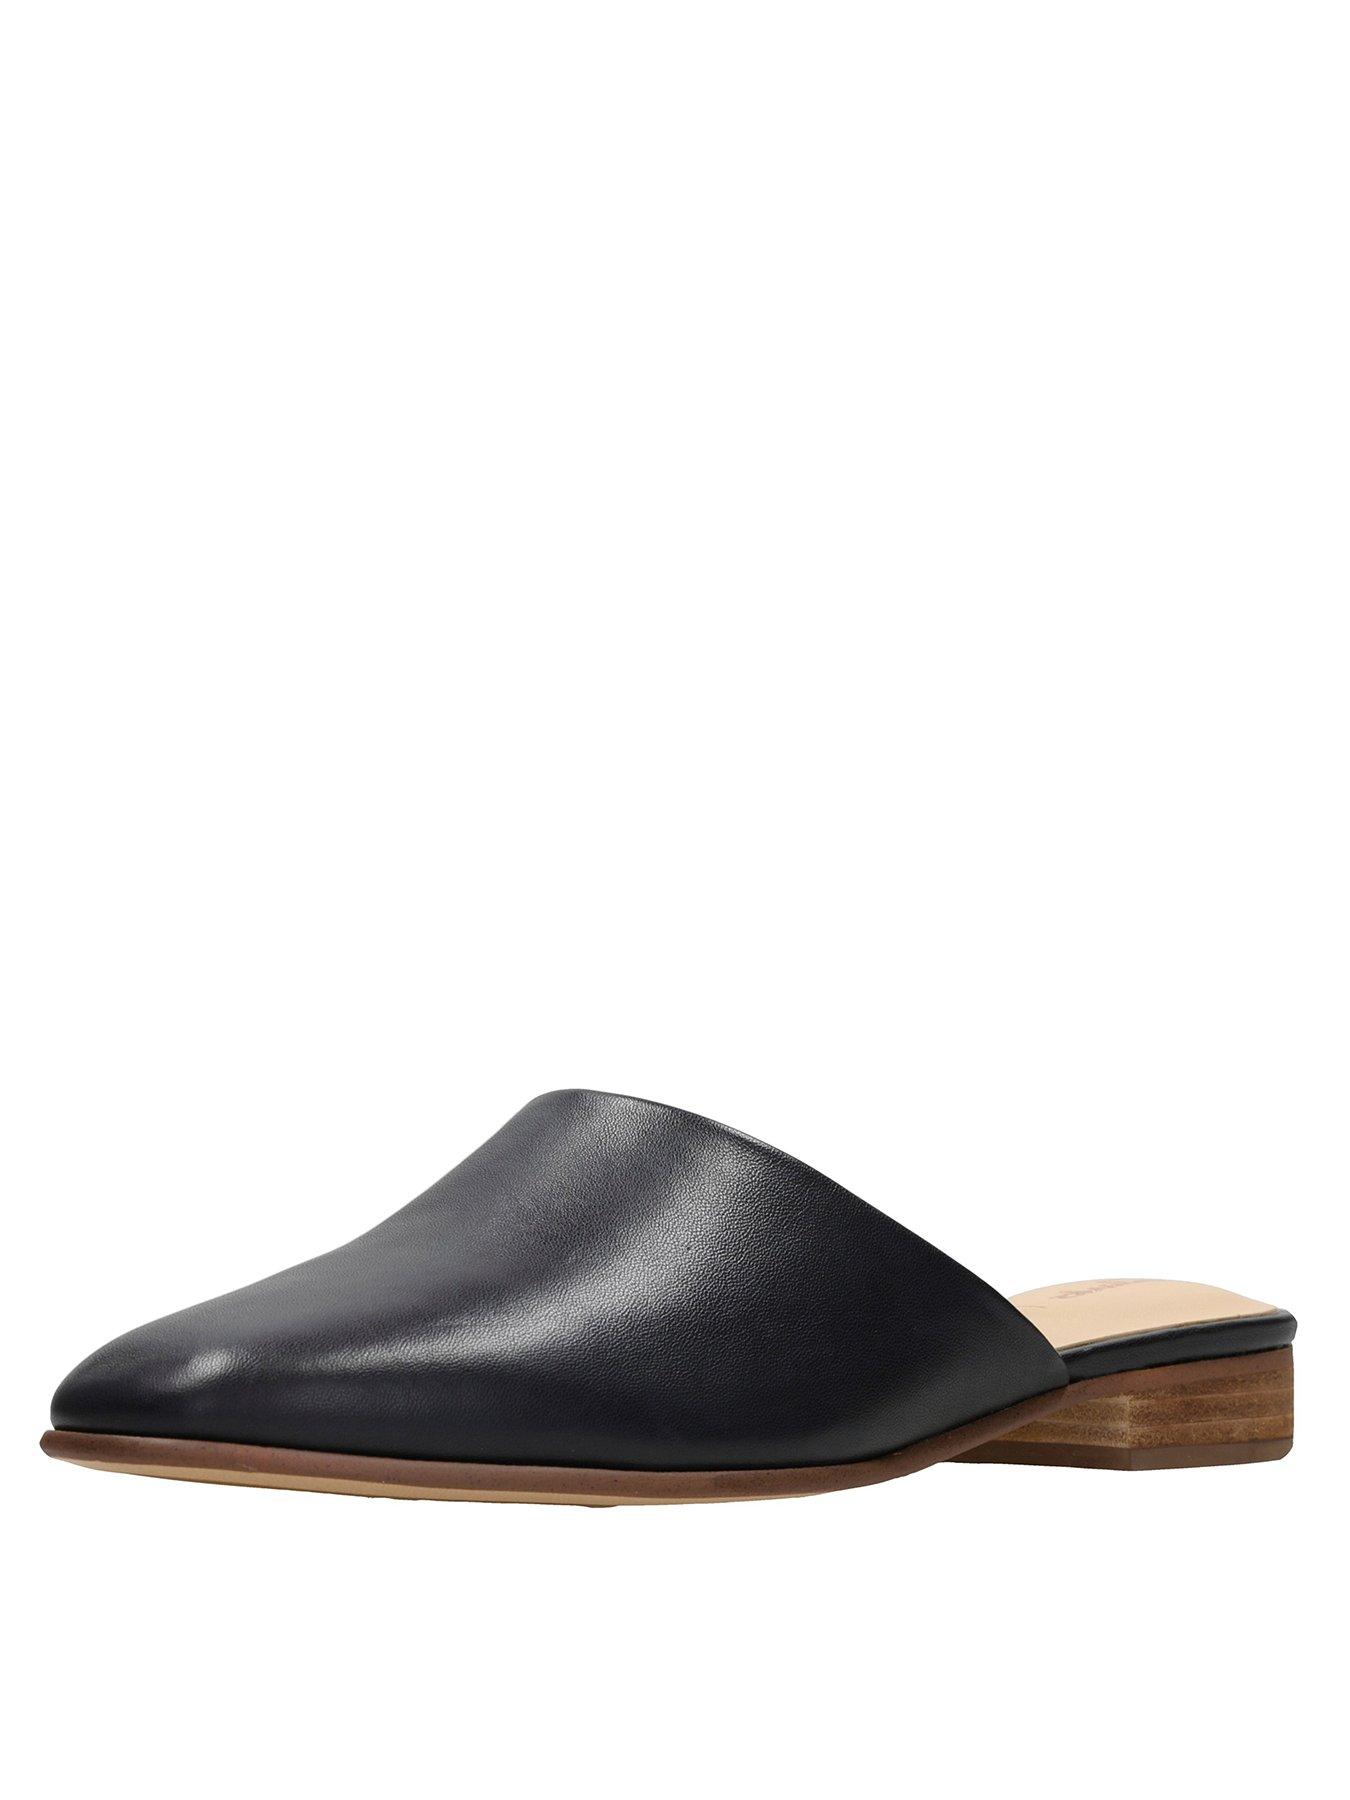 clarks mules clearance